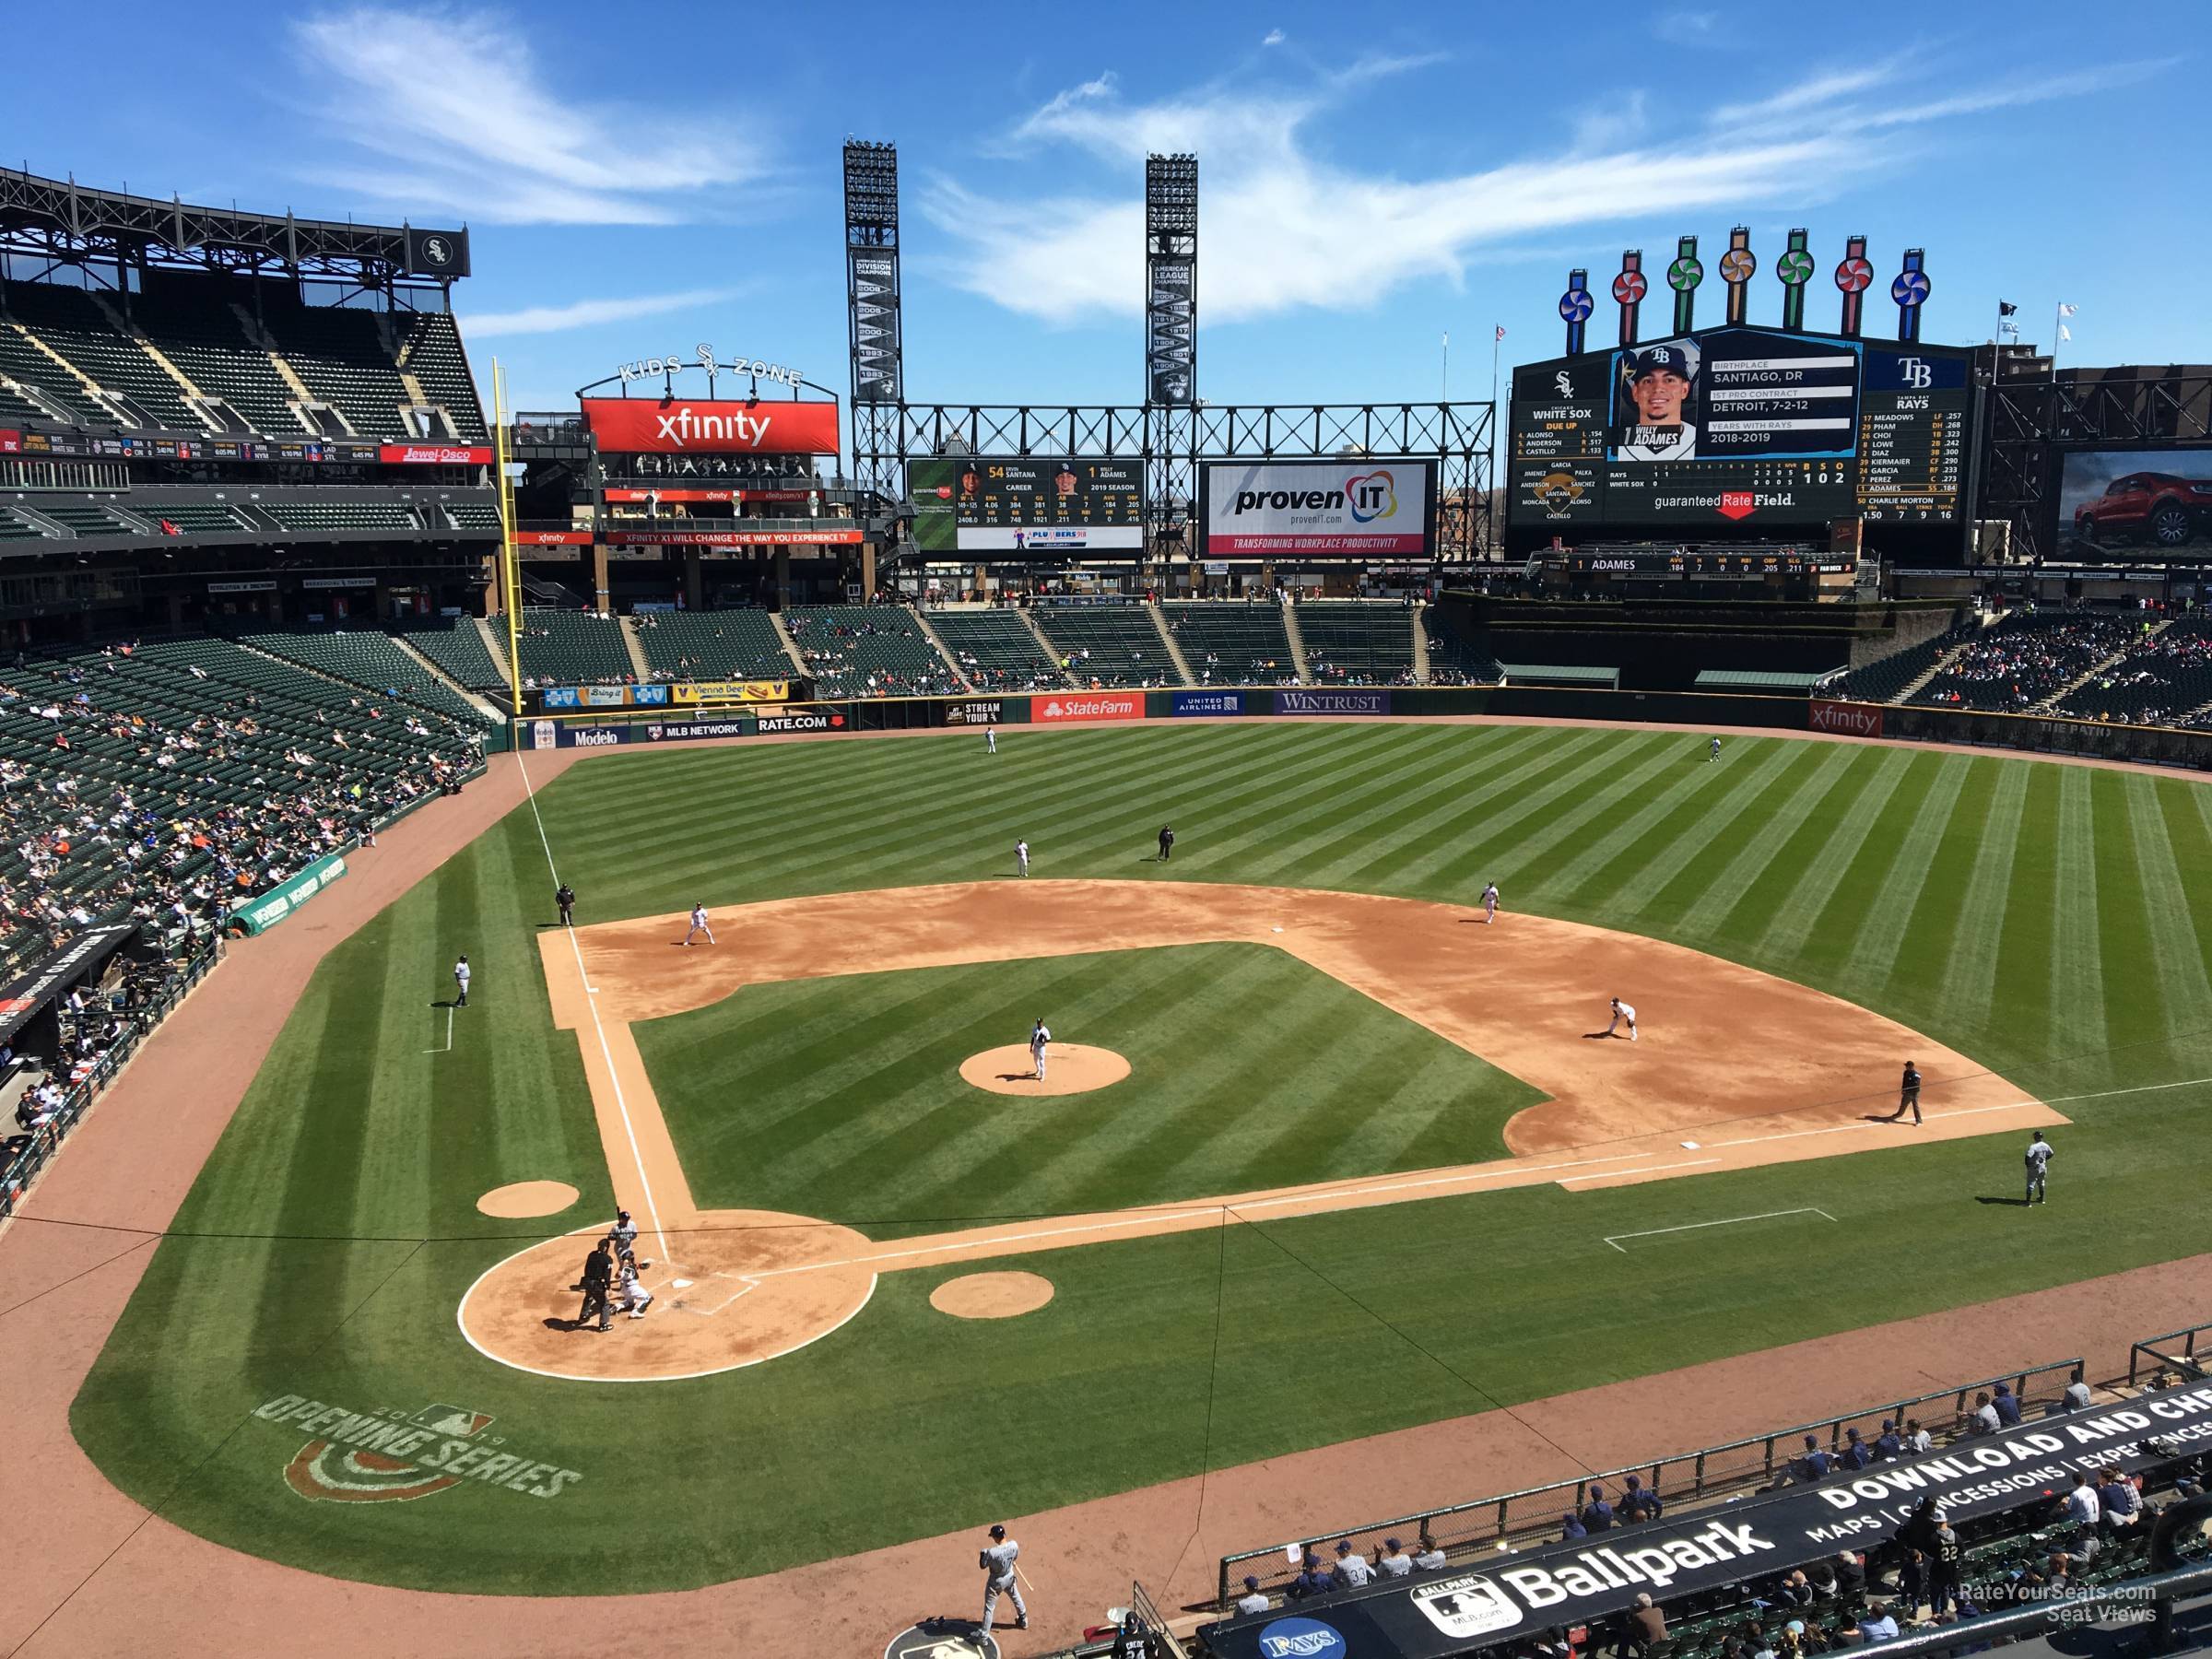 section 329, row 1 seat view  - guaranteed rate field